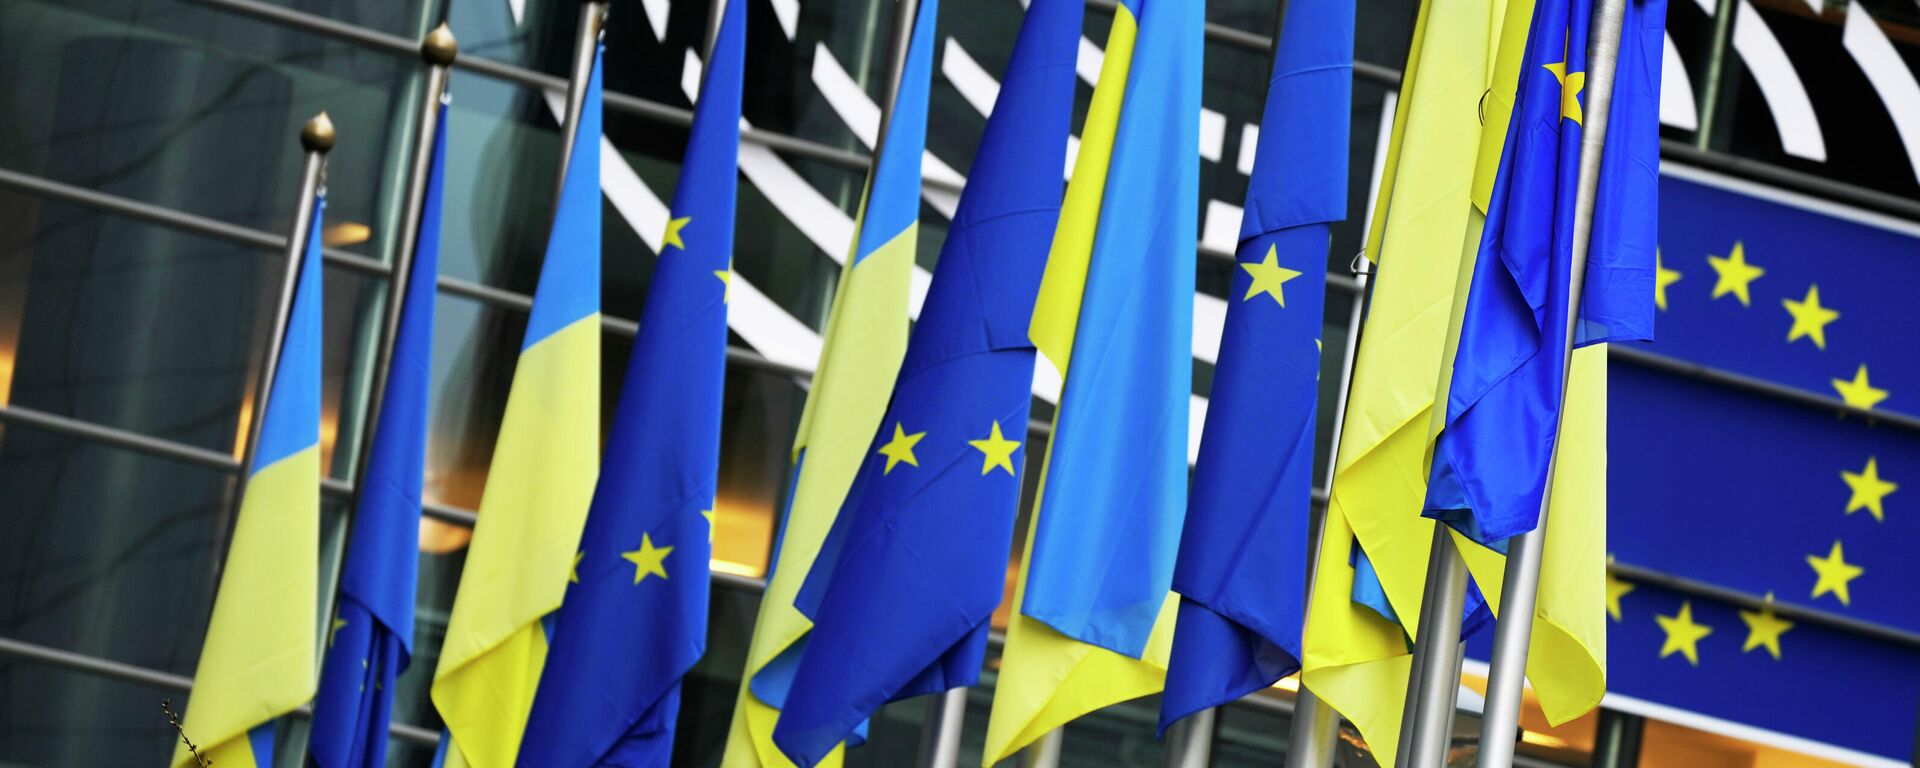 Ukraine and European Union flags hang together on the exterior of the building prior to an extraordinary plenary session on Ukraine at the European Parliament in Brussels, Tuesday, March 1, 2022 - Sputnik International, 1920, 05.09.2022